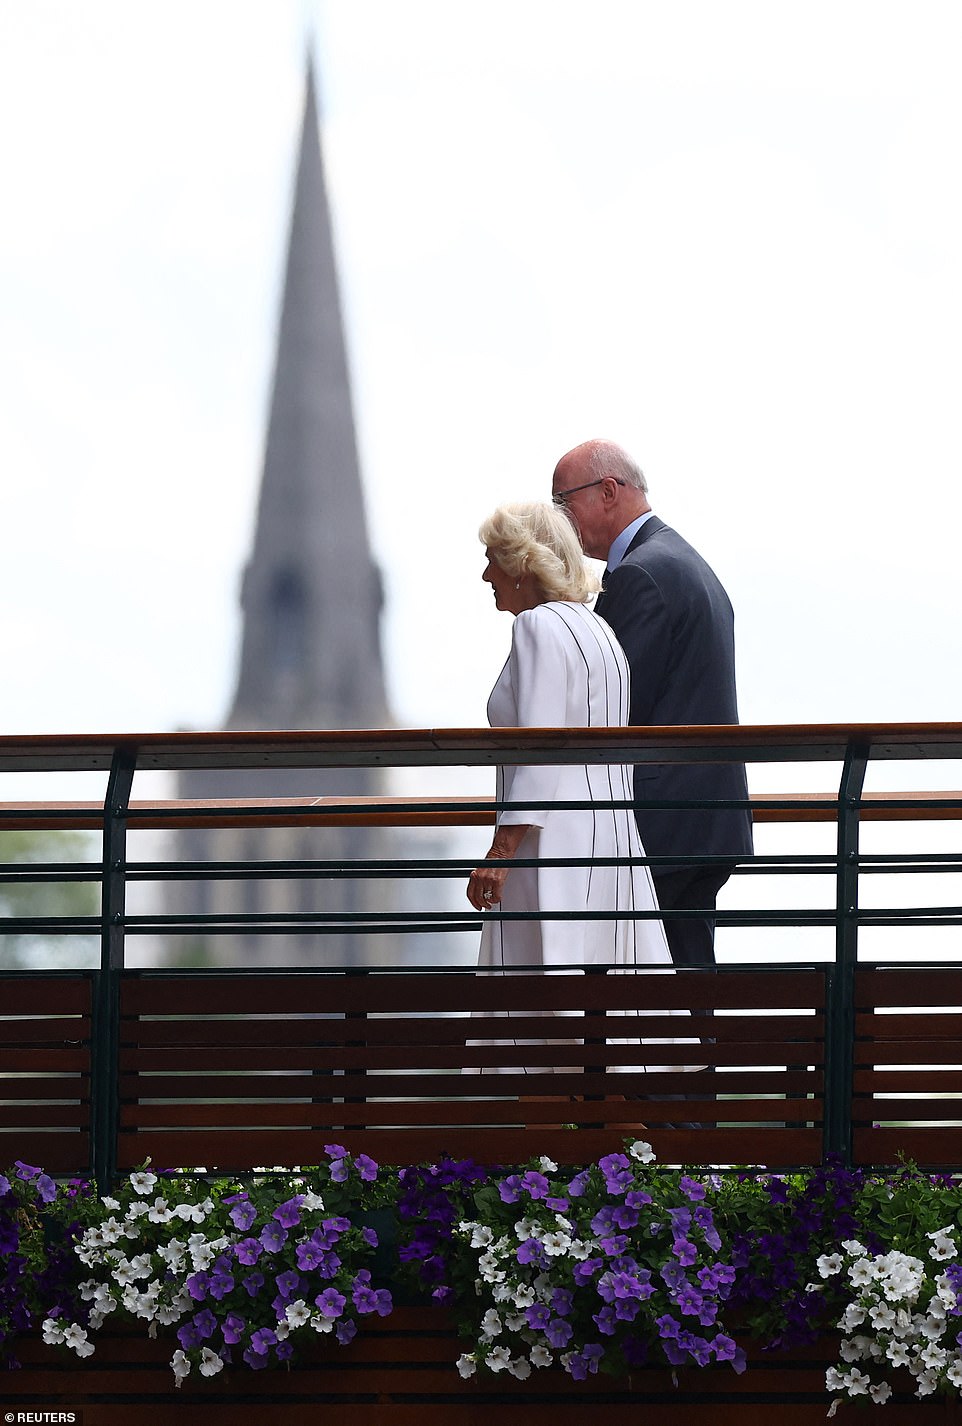 With Wimbledon's church spire in the background, Queen Camilla makes her way across the famous bridge to reach Centre Court